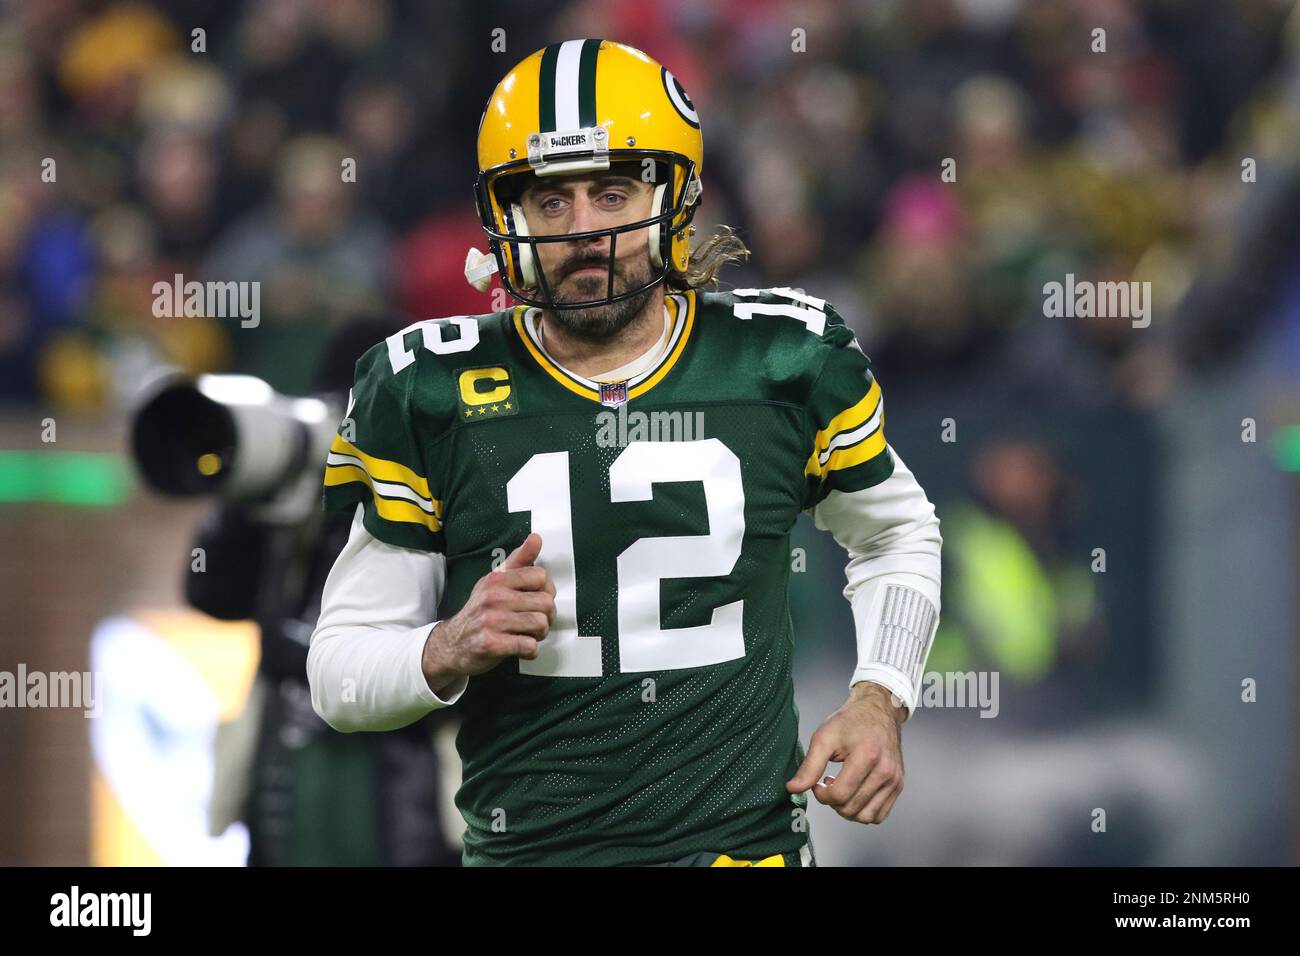 GREEN BAY, WI - DECEMBER 12: Green Bay Packers quarterback Aaron Rodgers (12)  runs onto the field during a game between the Green Bay Packers and the  Chicago Bears at Lambeau Field